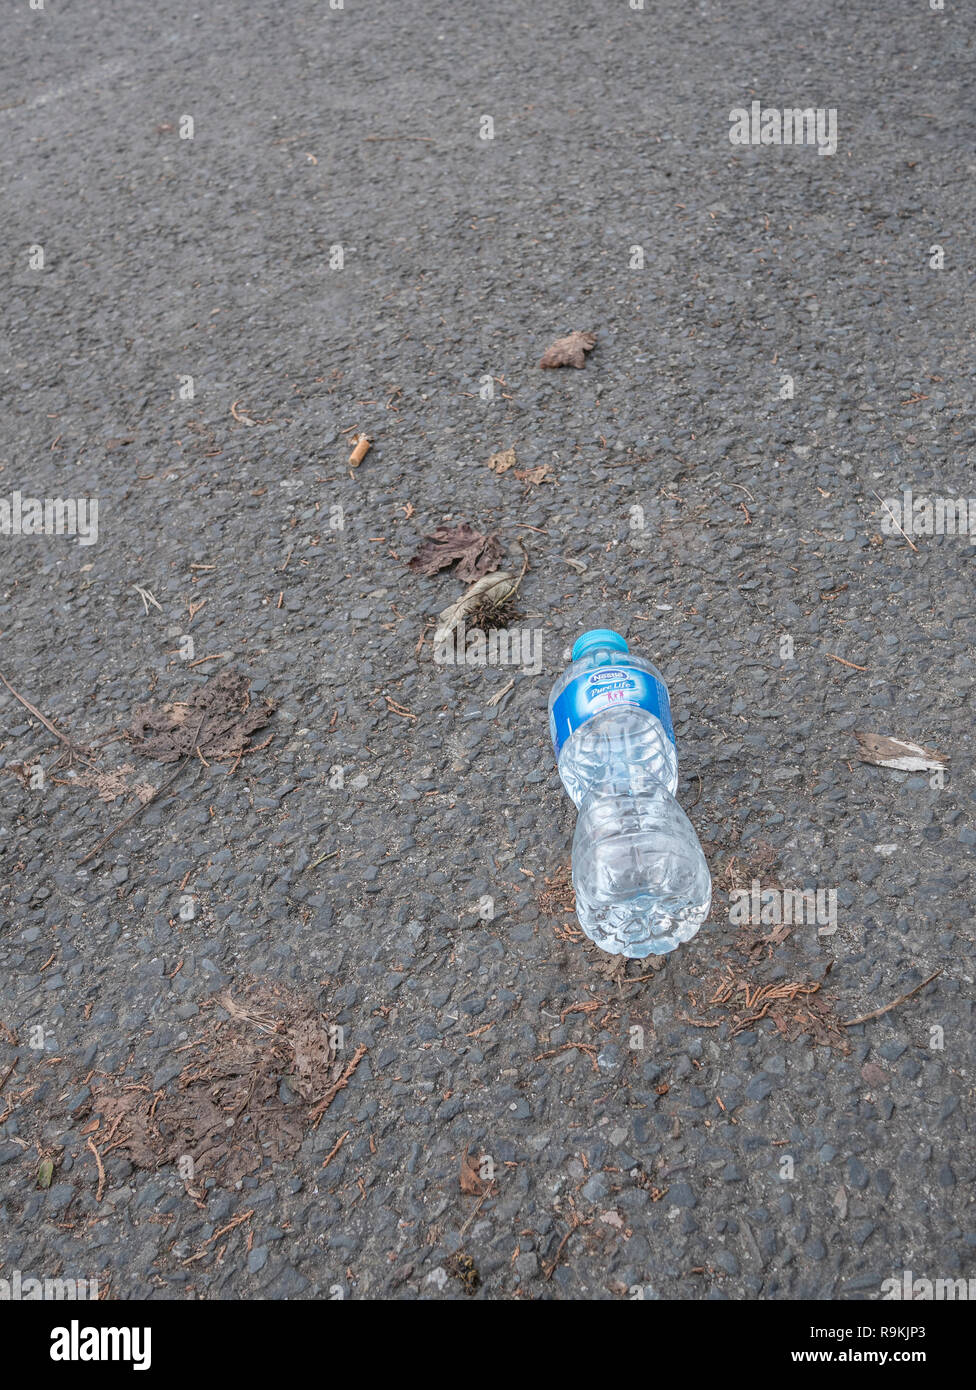 PTFE plastic mineral water bottle discarded in urban area. Metaphor plastic pollution, environmental pollution, war on plastic waste, plastic rubbish. Stock Photo